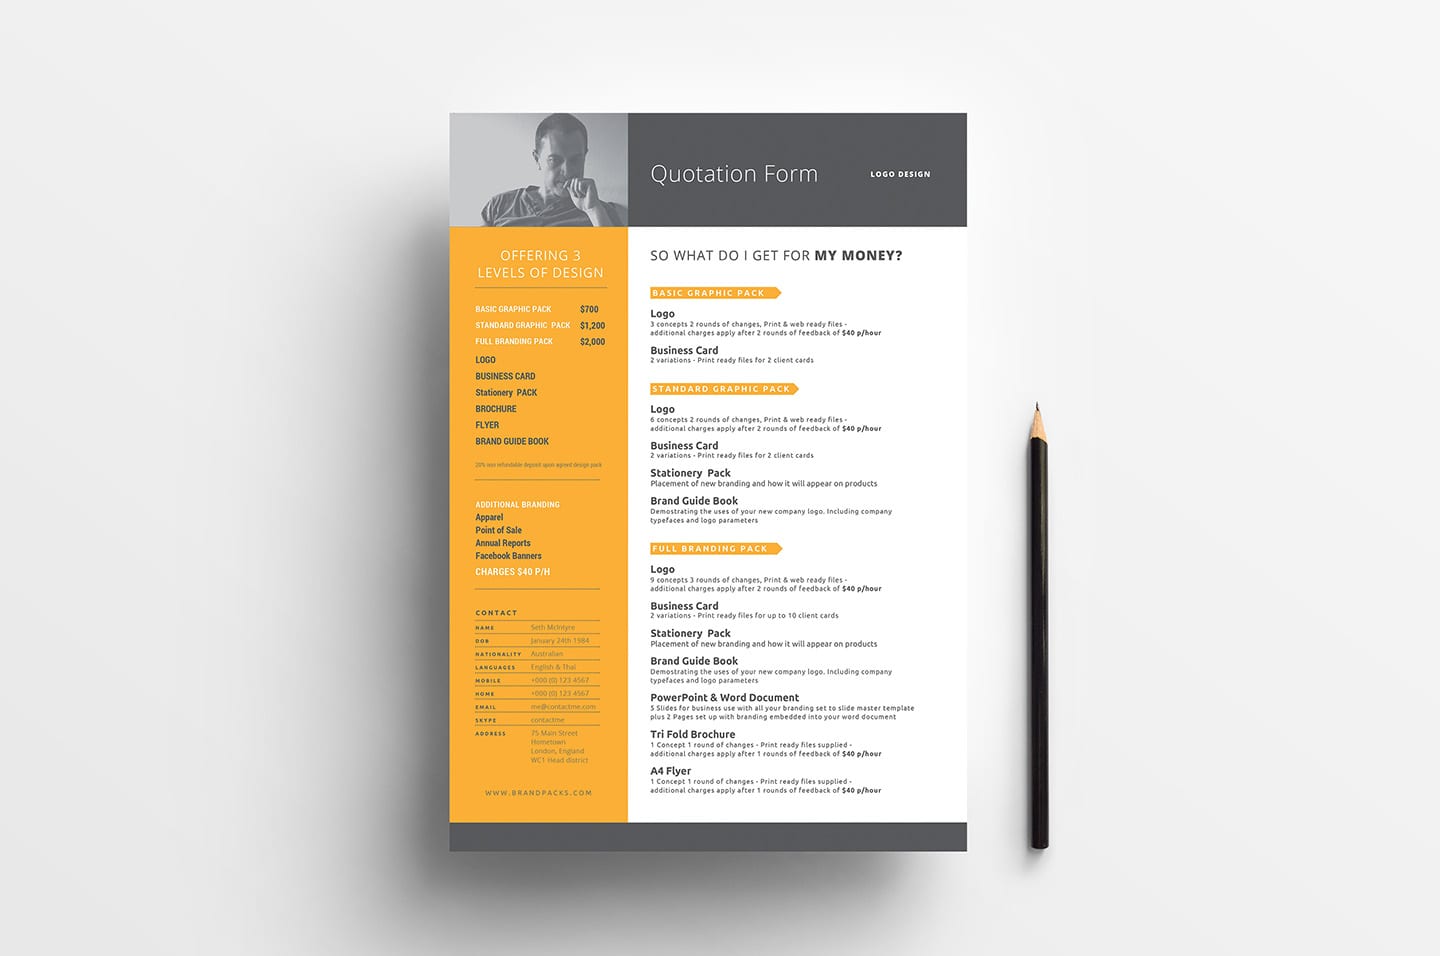 Free Quotation Form Template - PSD, Ai & Vector - BrandPacks